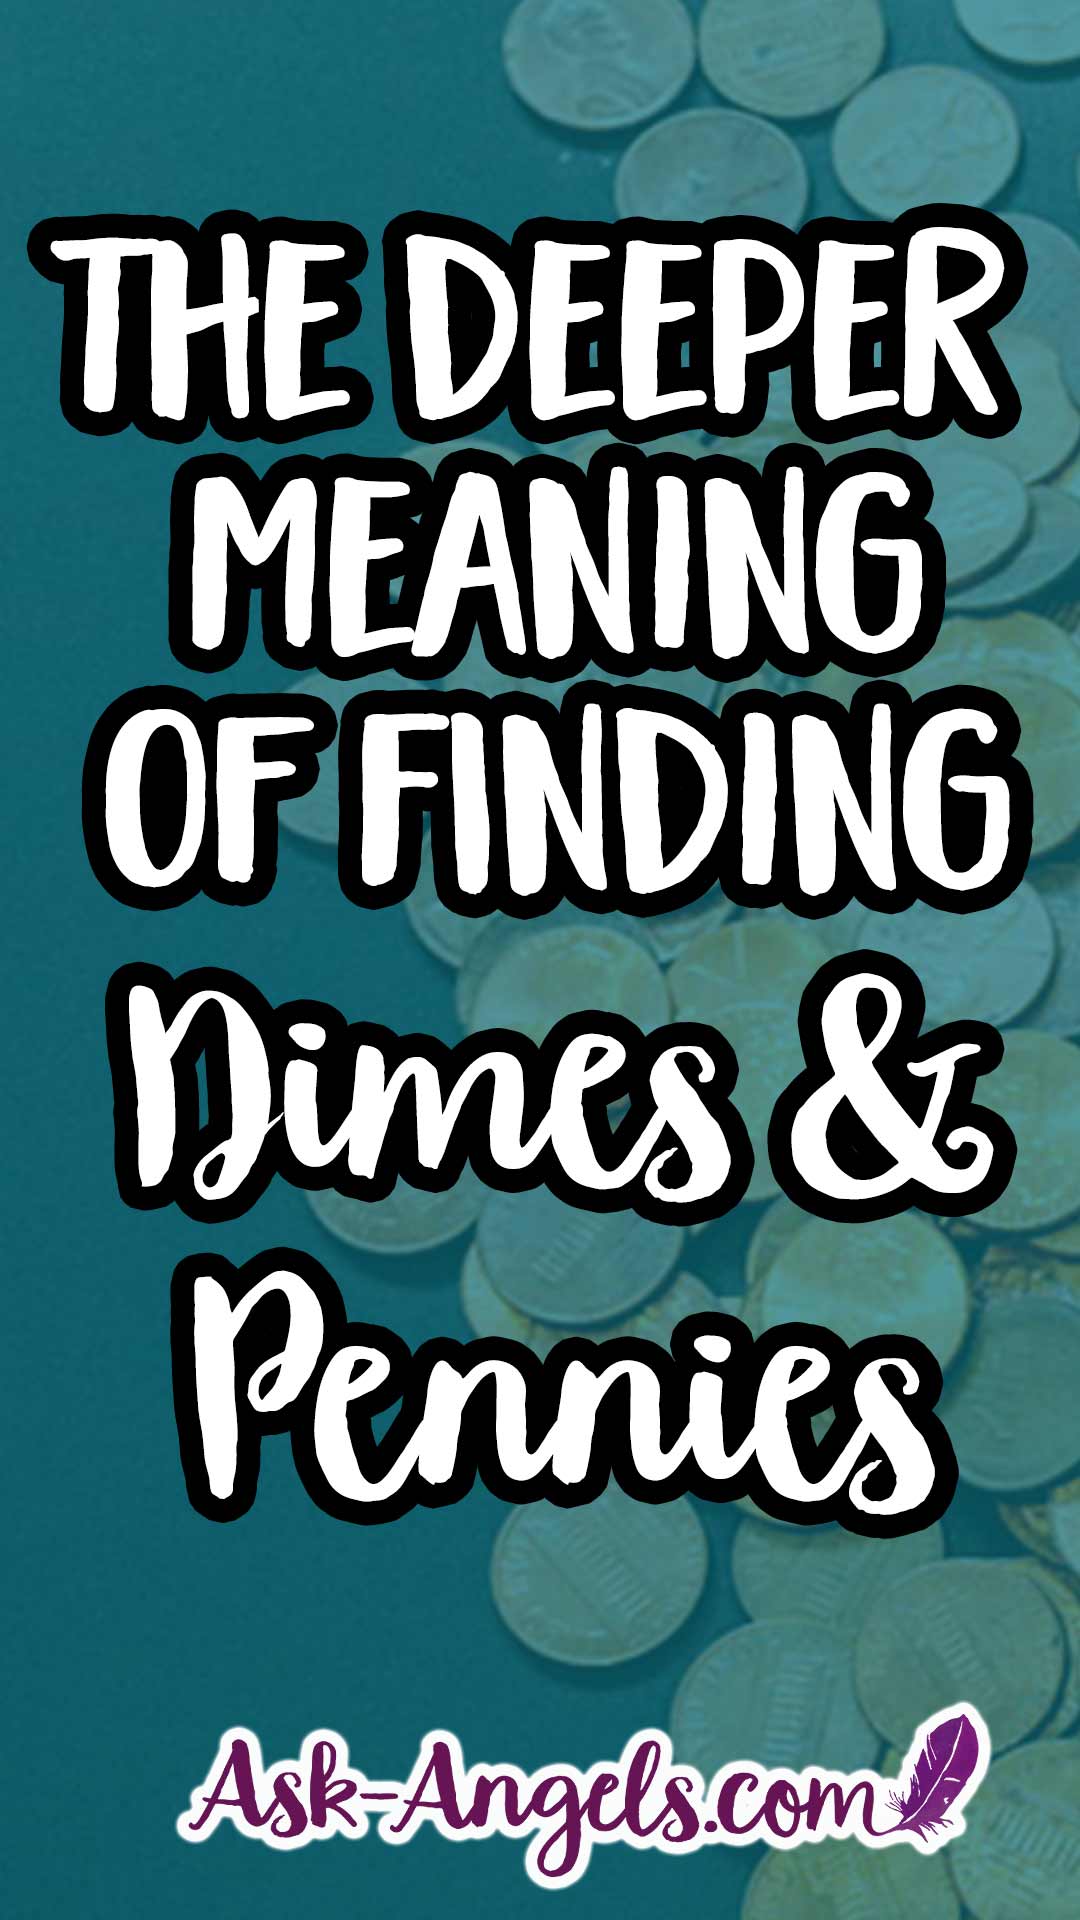 The Deeper Meaning of Finding Dimes and Pennies